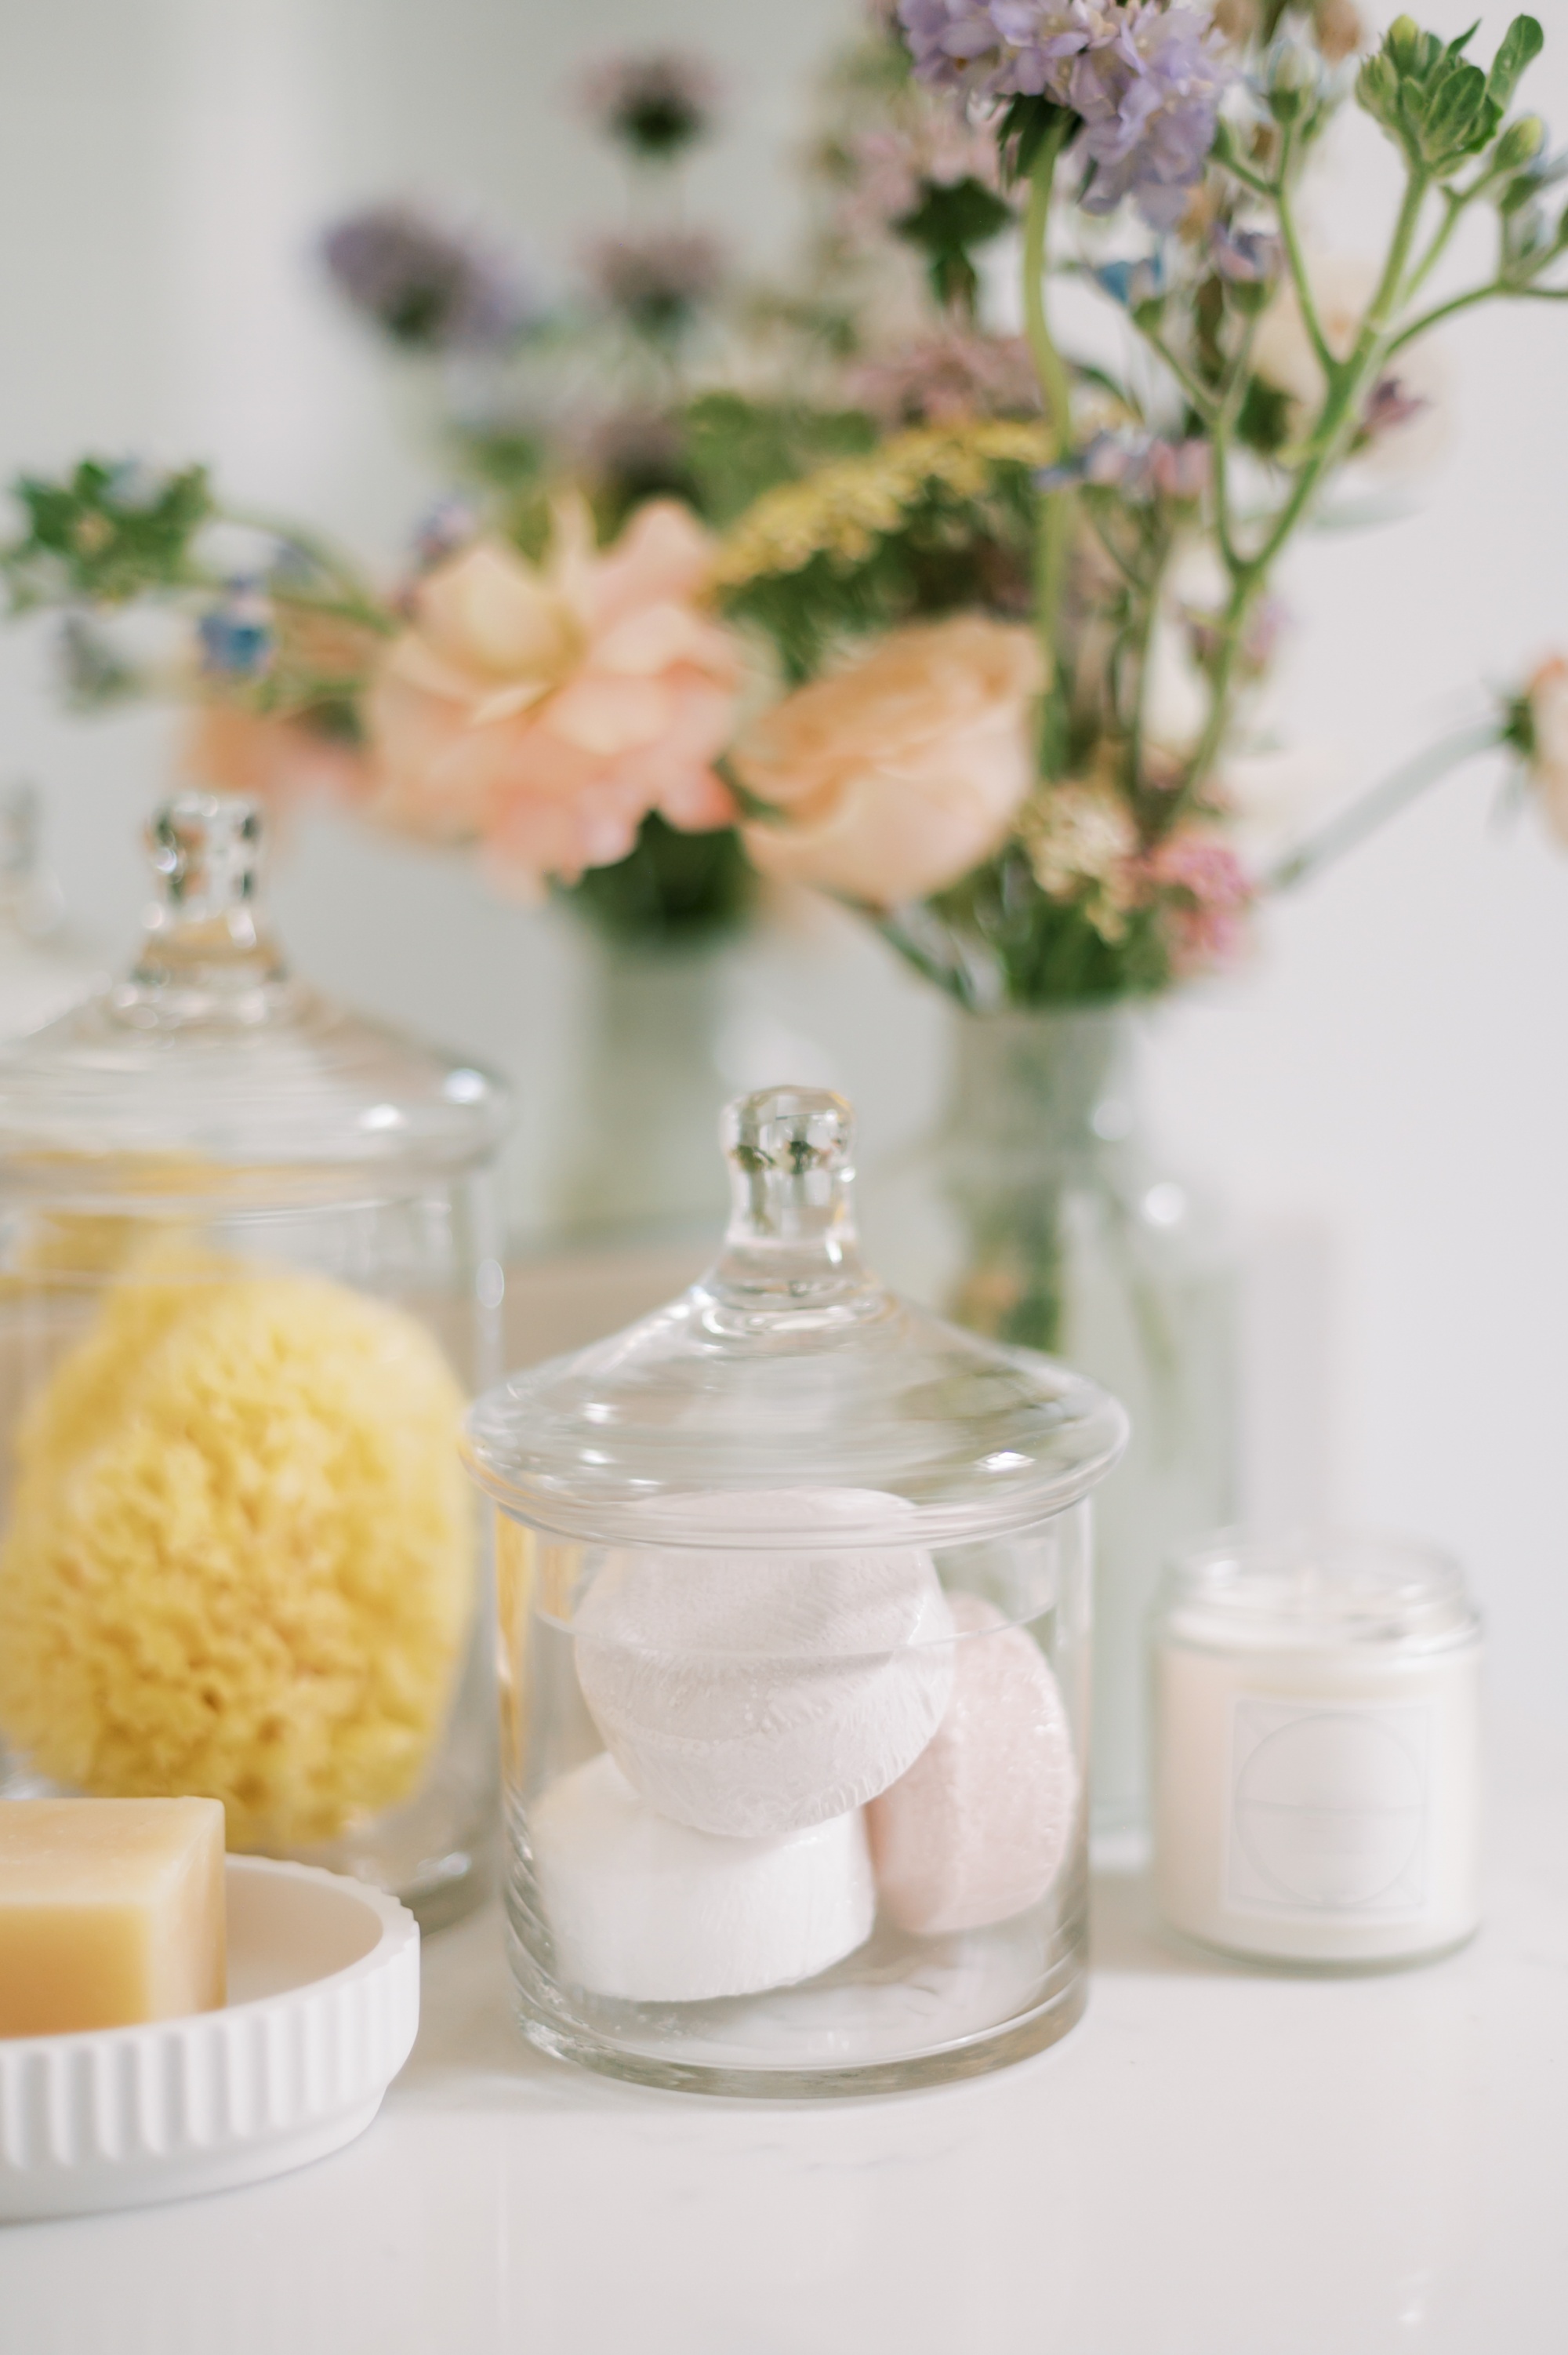 How To Update Your Powder Room With These 4 Easy Changes including pretty soap holder and fresh flowers